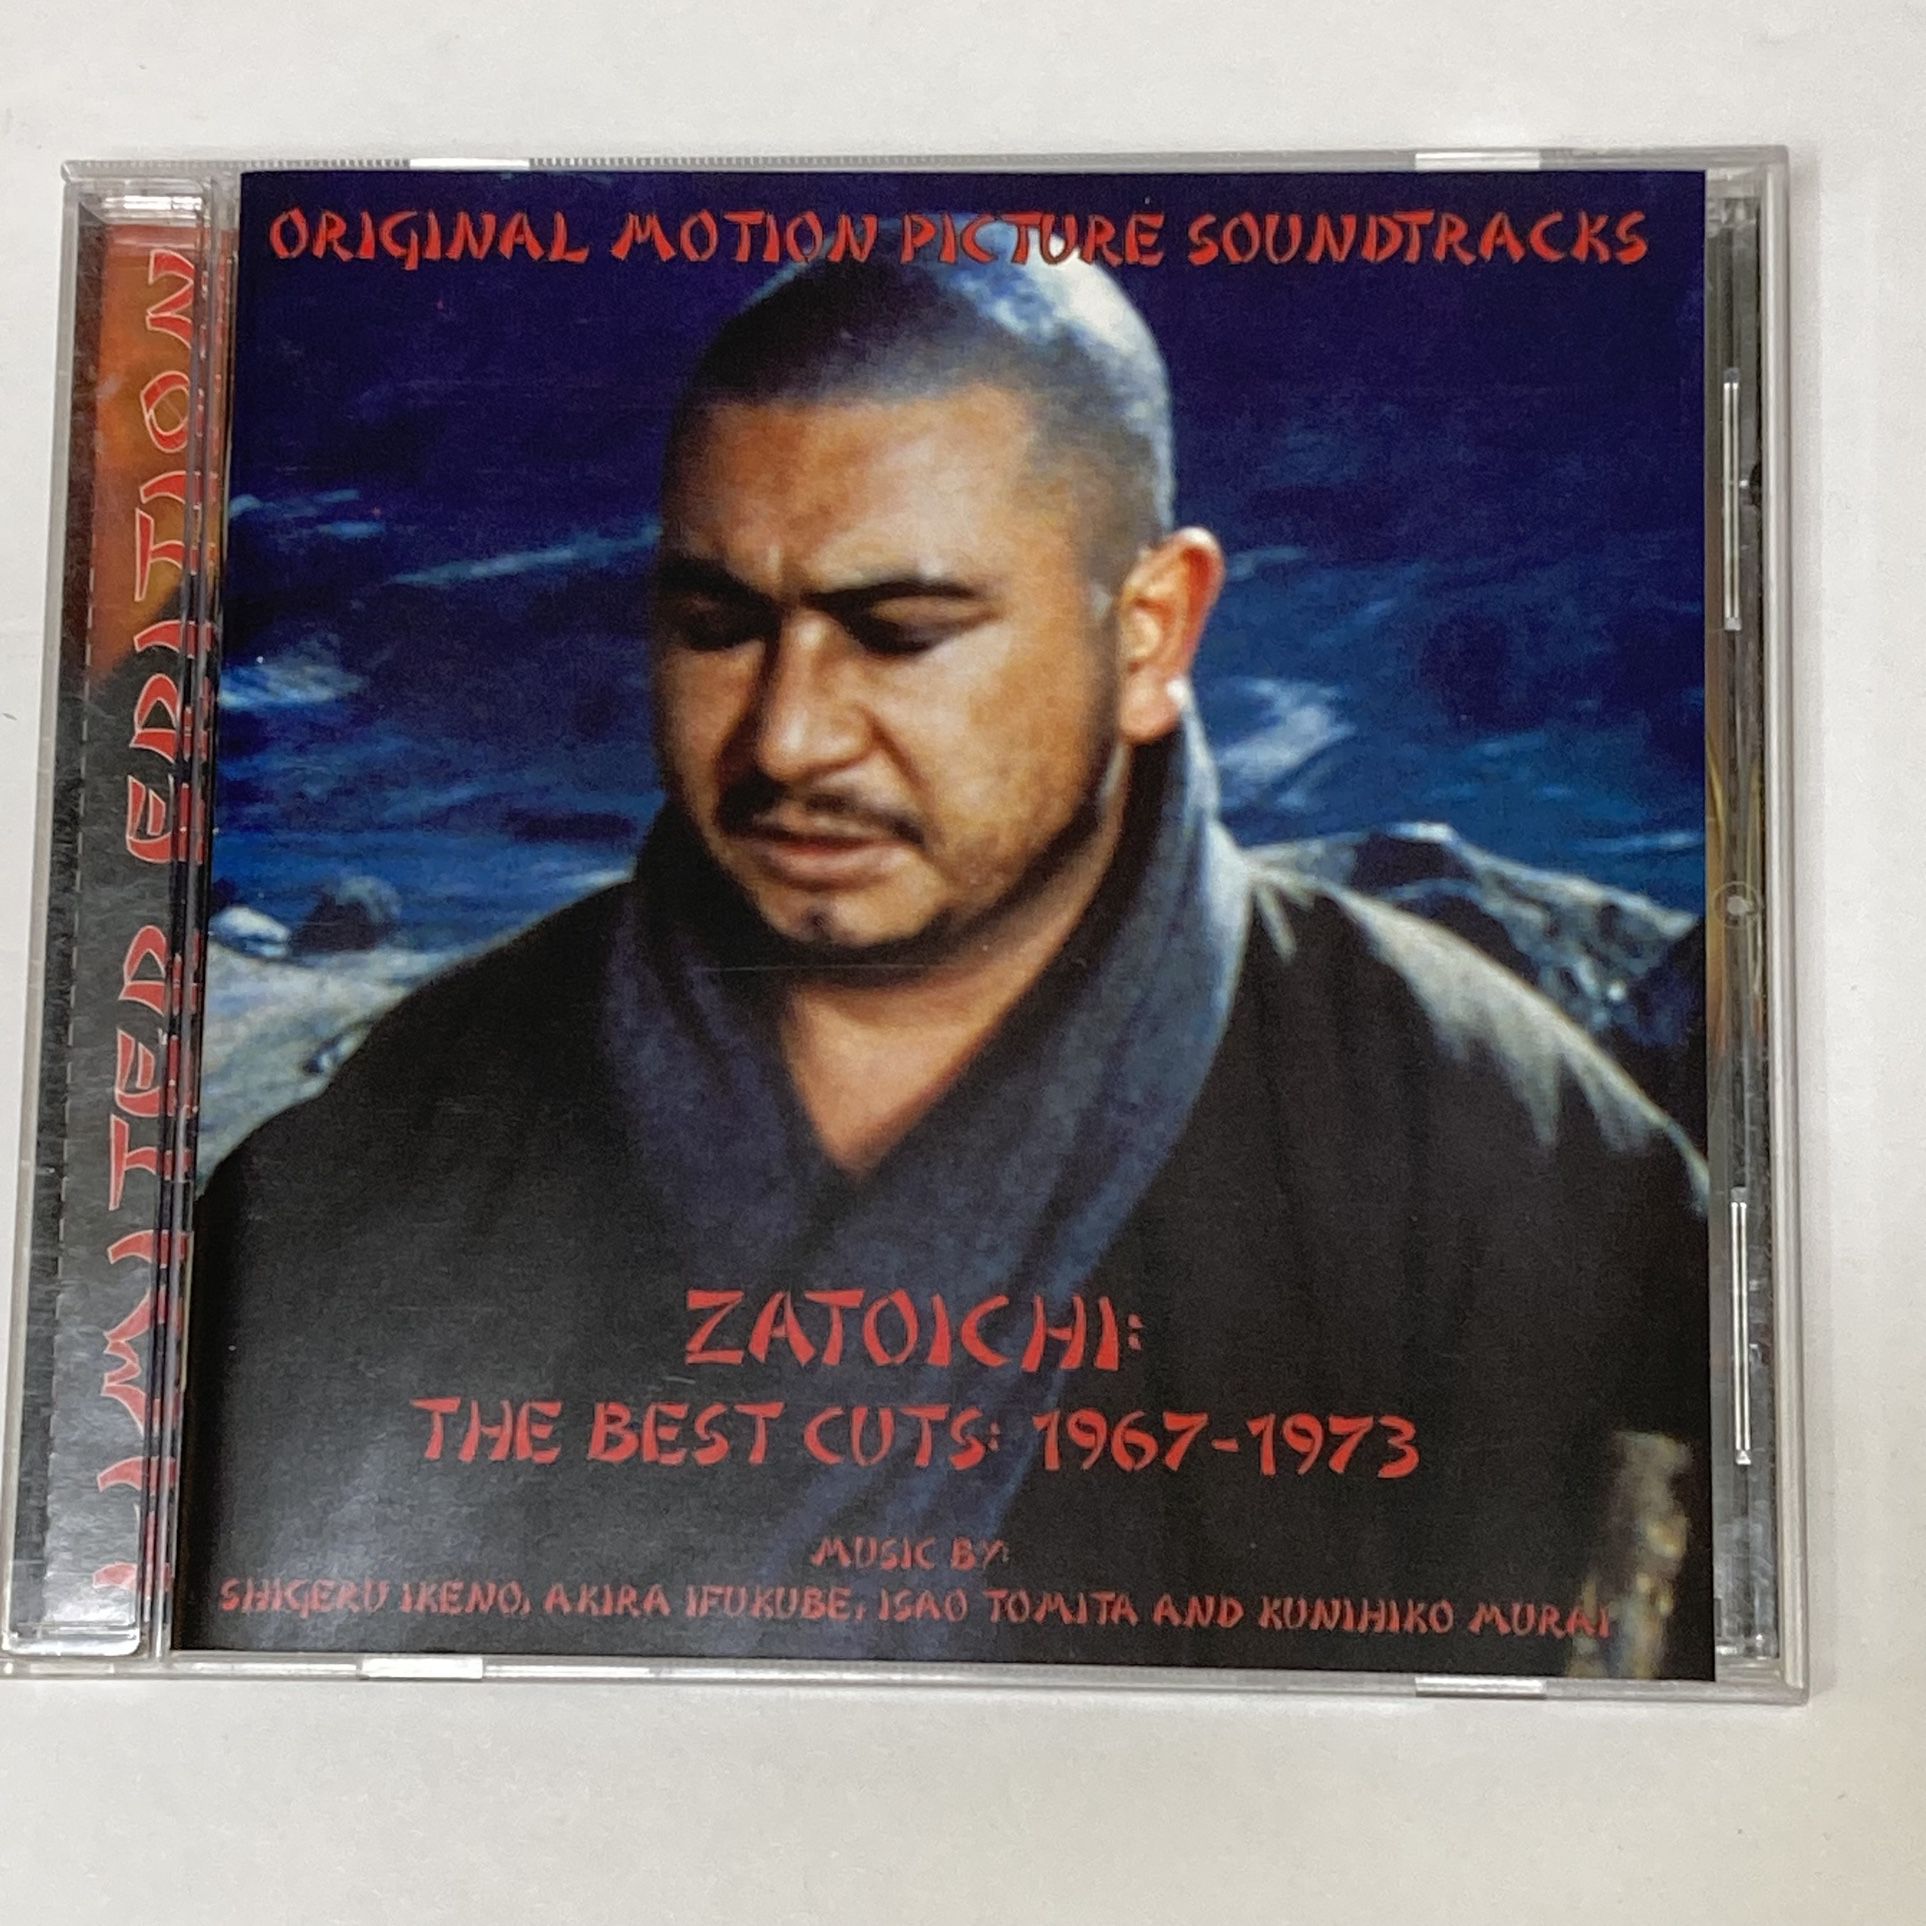 Zatouchi The Best of Cuts: 1(contact info removed) Soundtrack Limited Edition CD